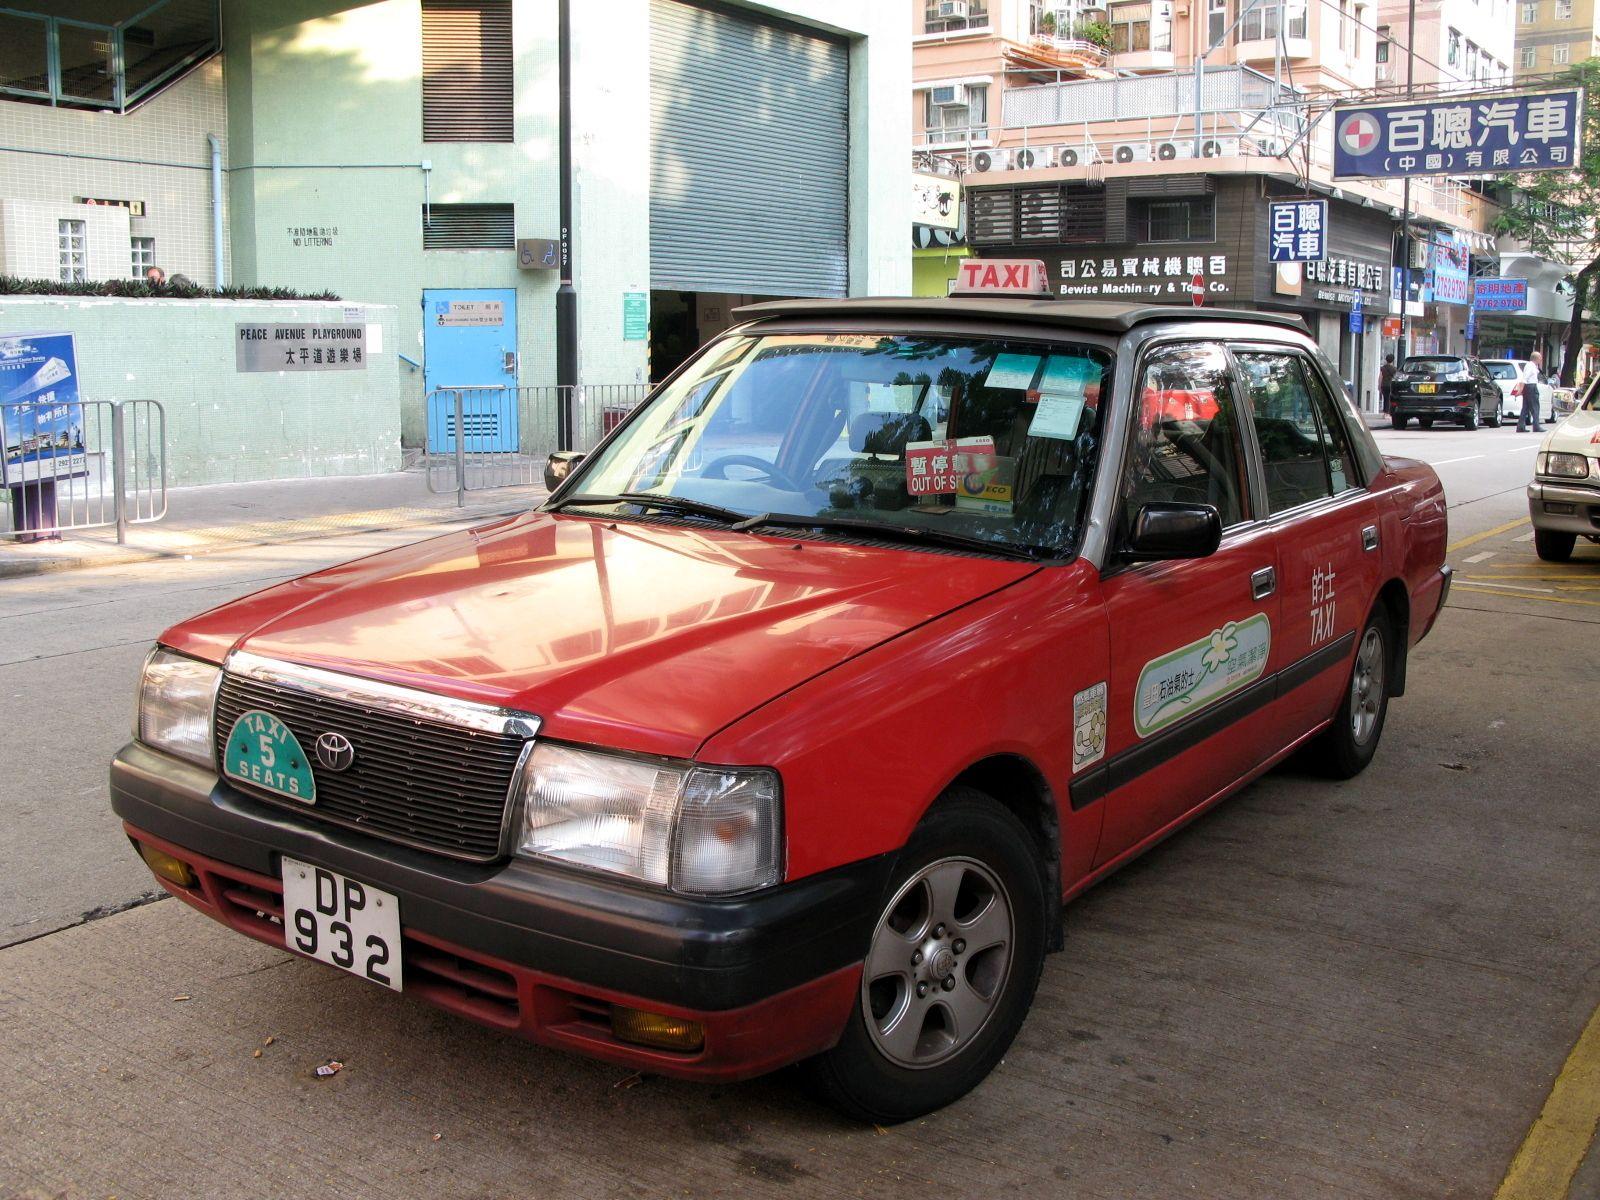 Cities for Taxis, With Commentary Travel Writer